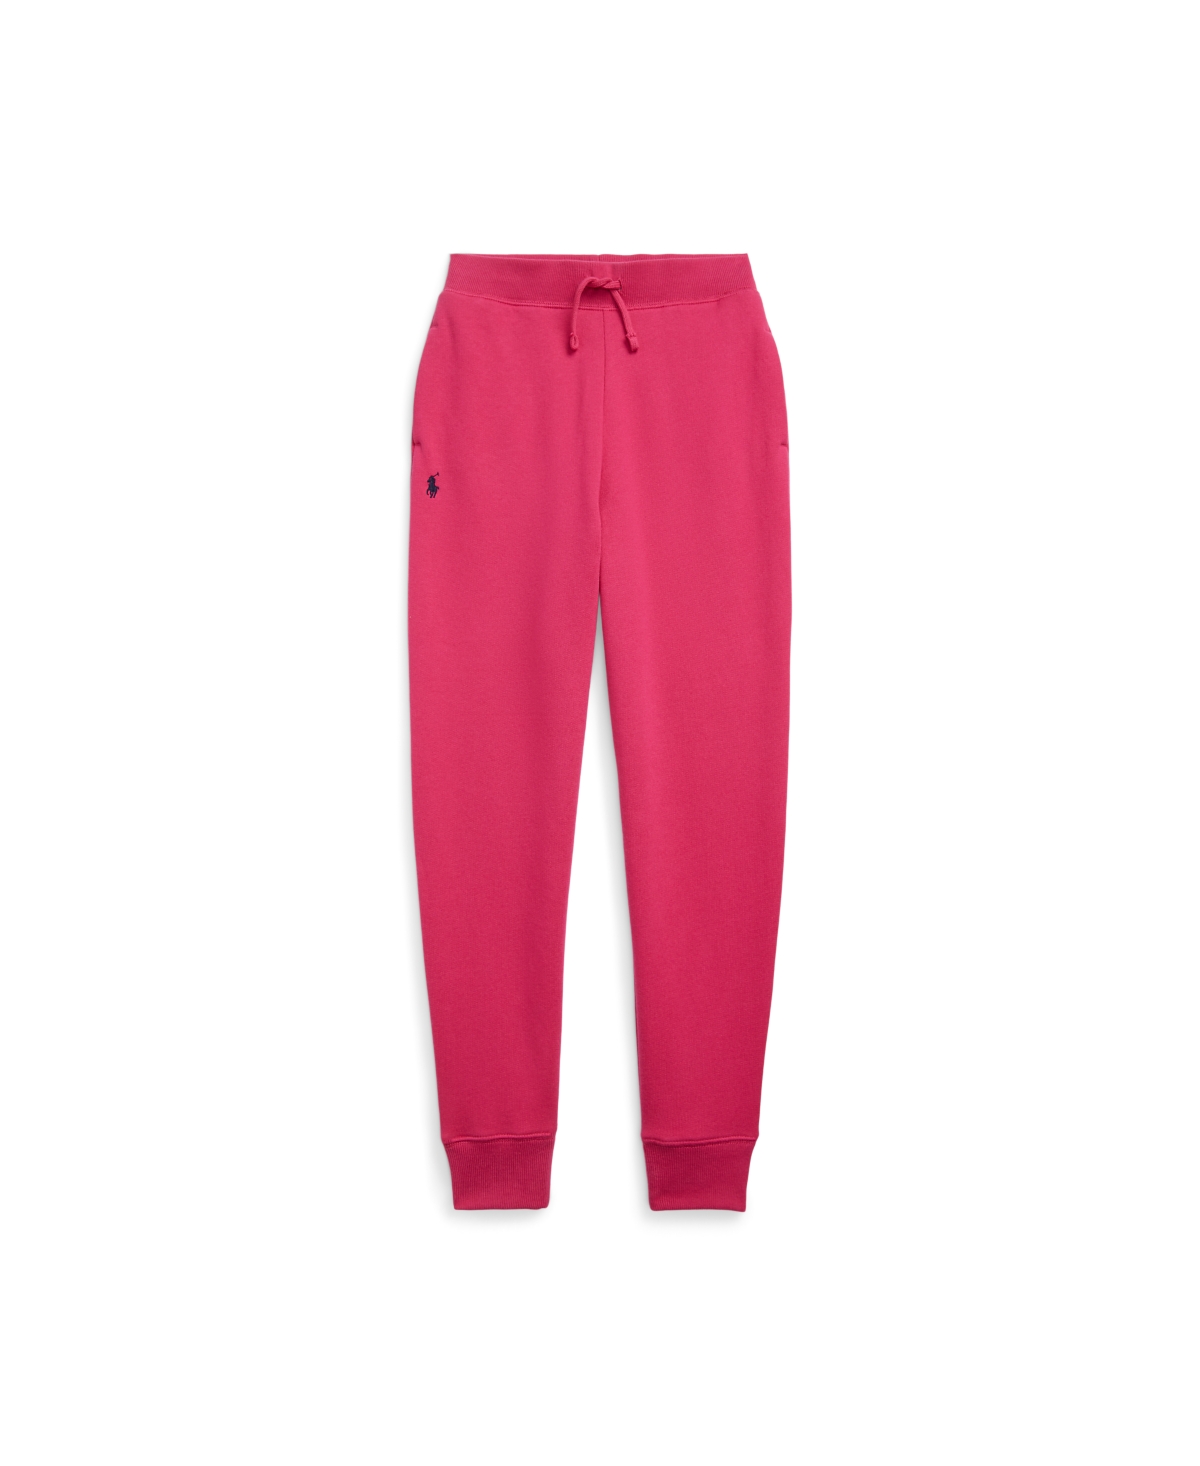 Polo Ralph Lauren Kids' Toddler And Little Girls Fleece Jogger Pants In Preppy Pink With Navy